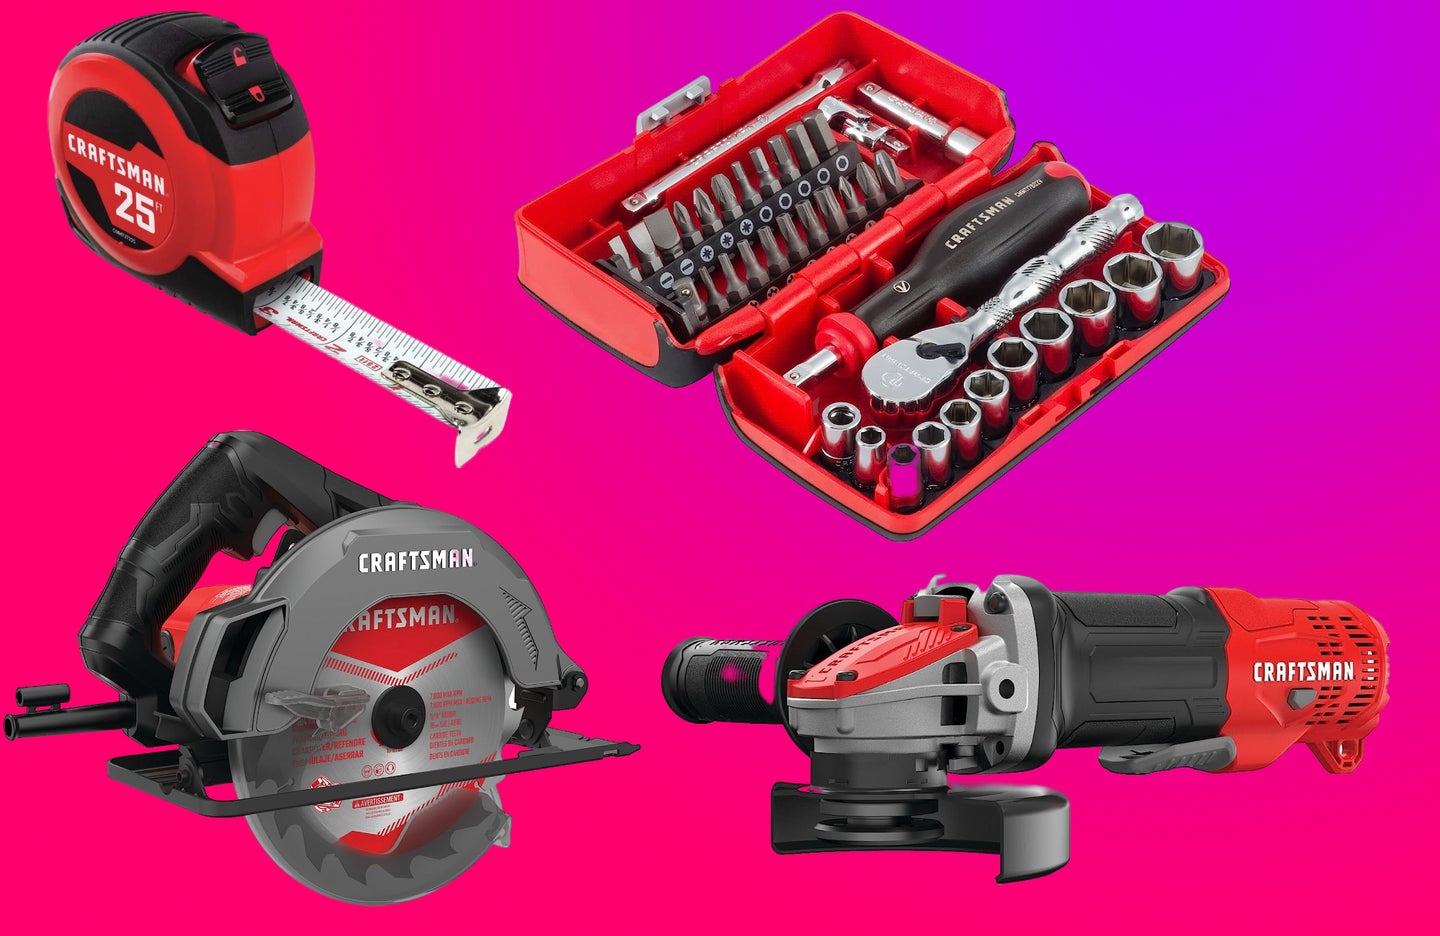 The best Craftsman tool deals Prime Day